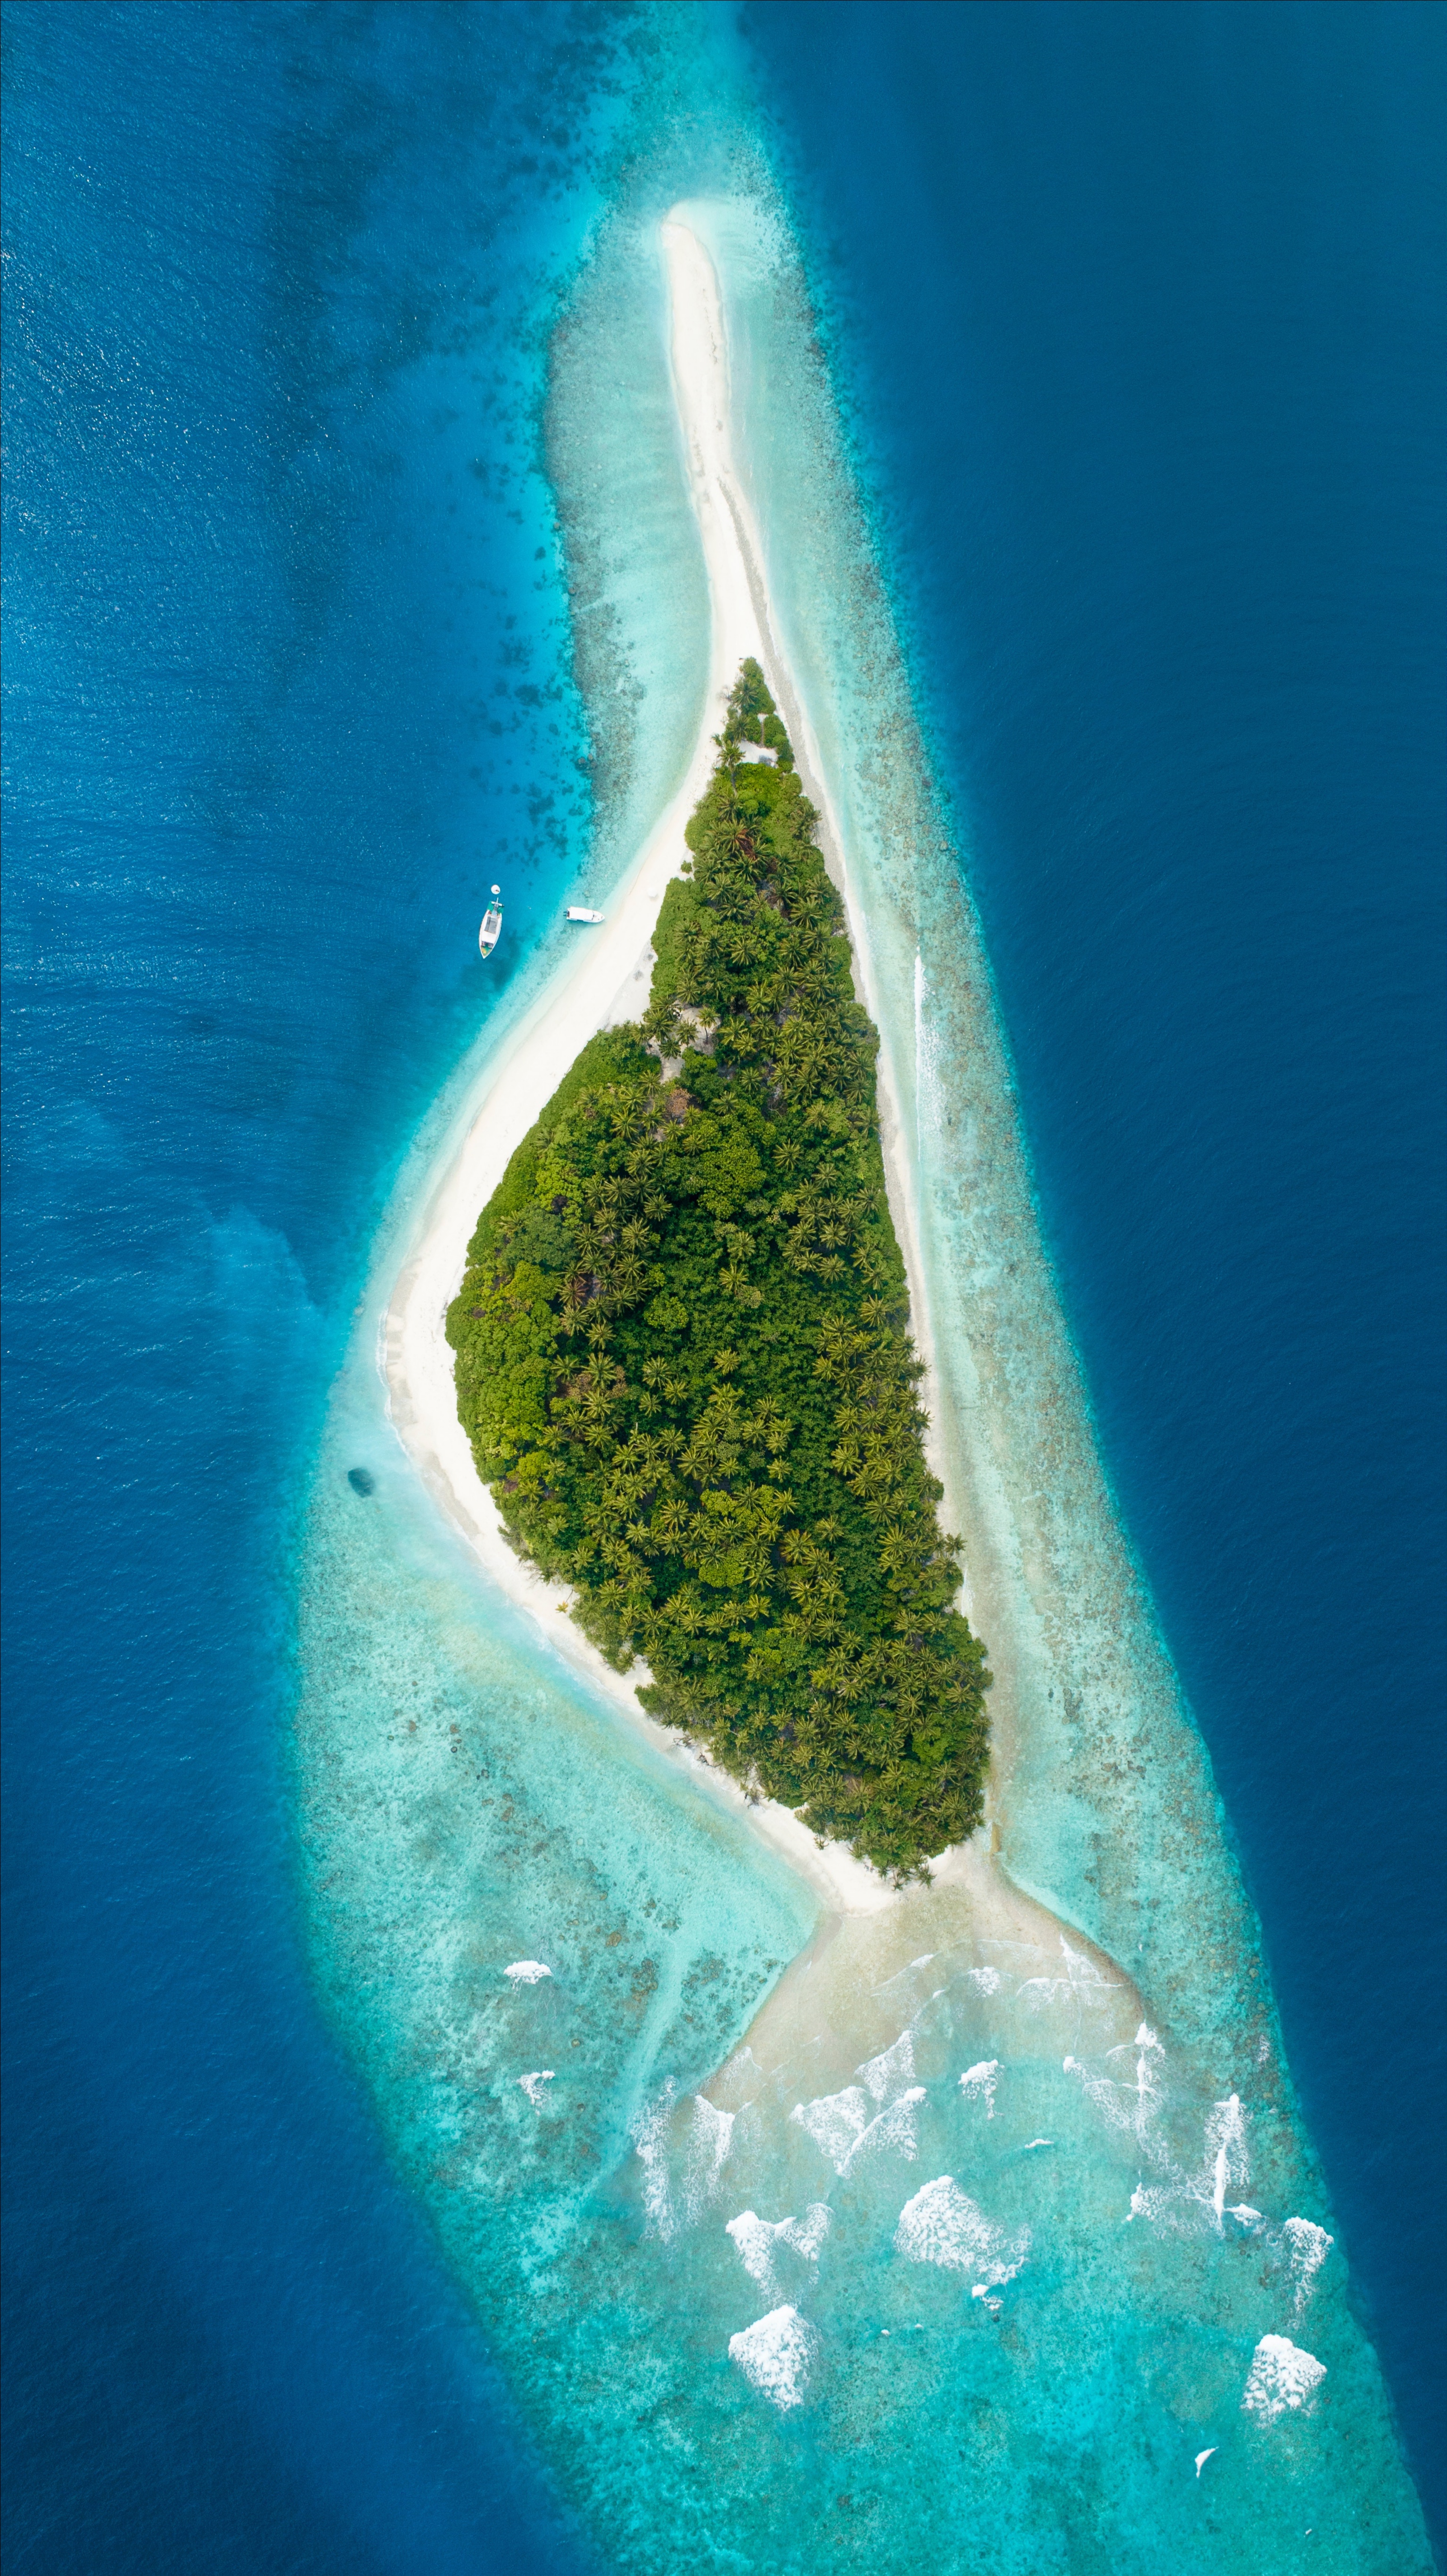 tropics, nature, view from above, ocean, island, maldives